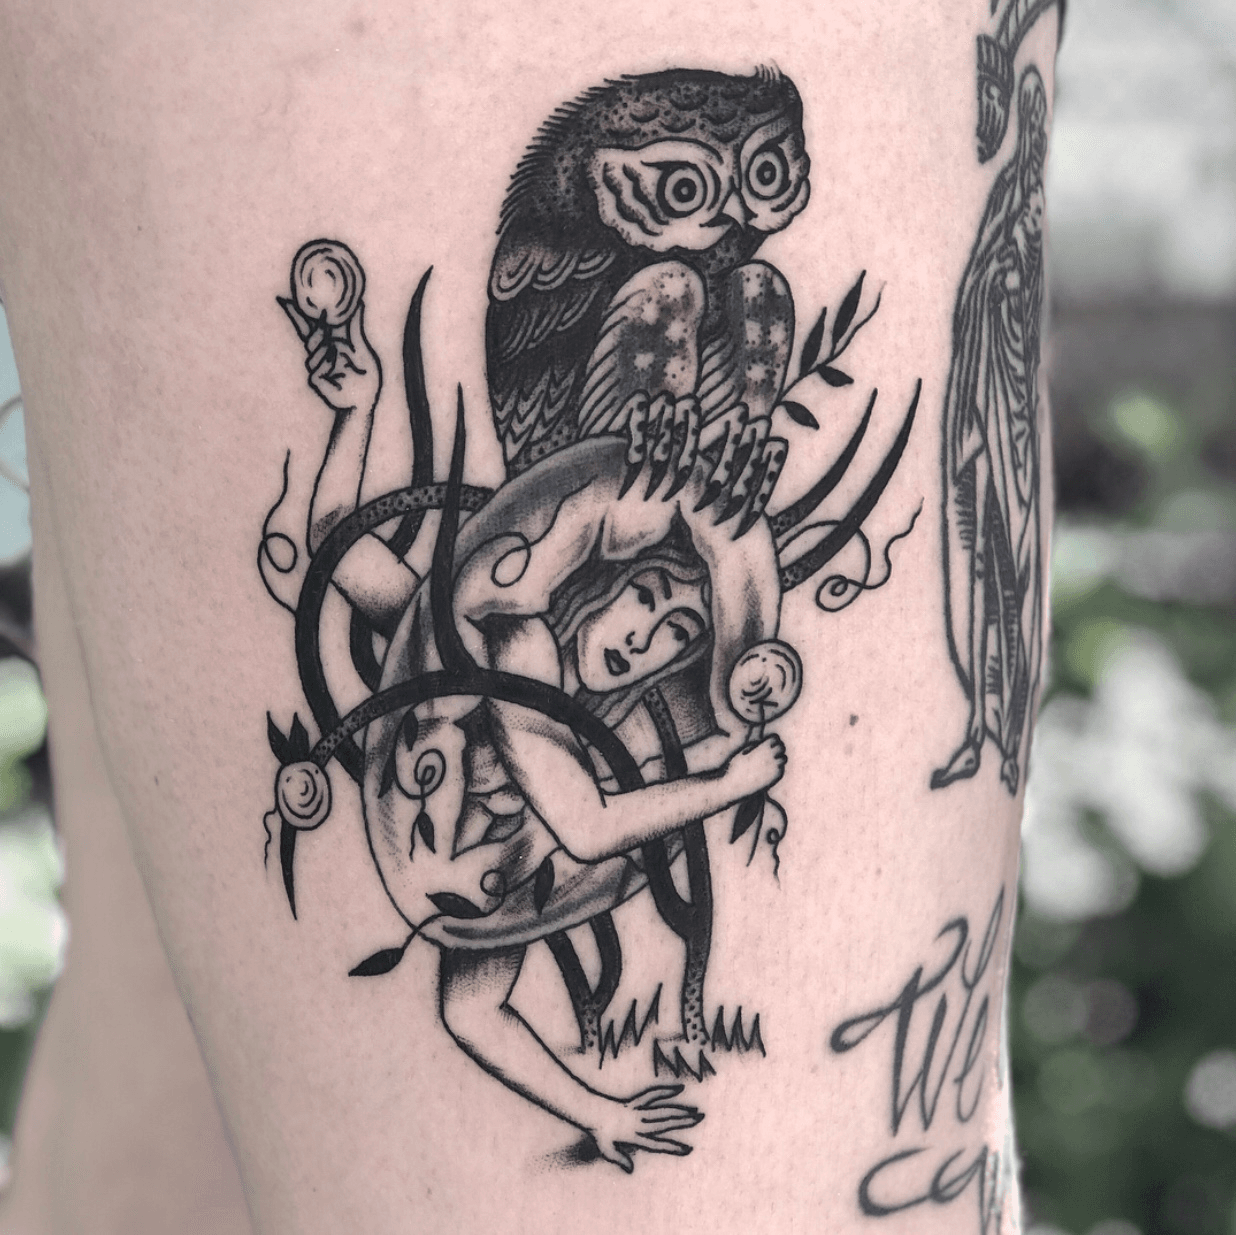 Garden of Earthly Delights  Tattoos Tattoo styles Tattoo designs